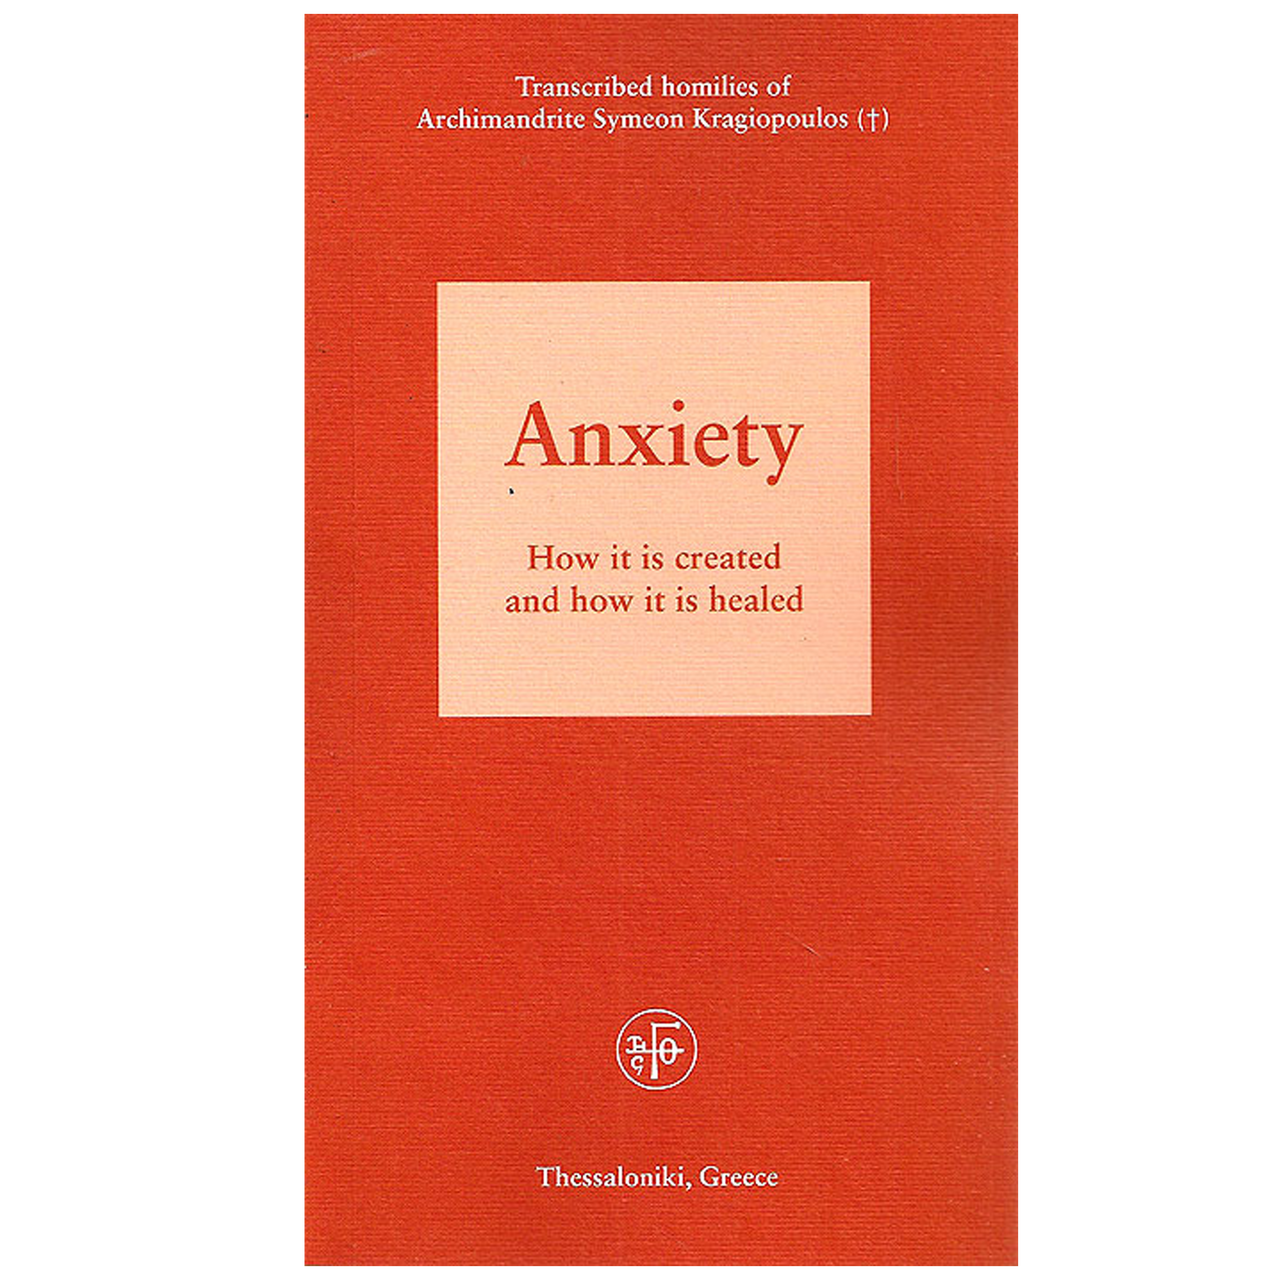 Anxiety: How It Is Created and How It Is Healed